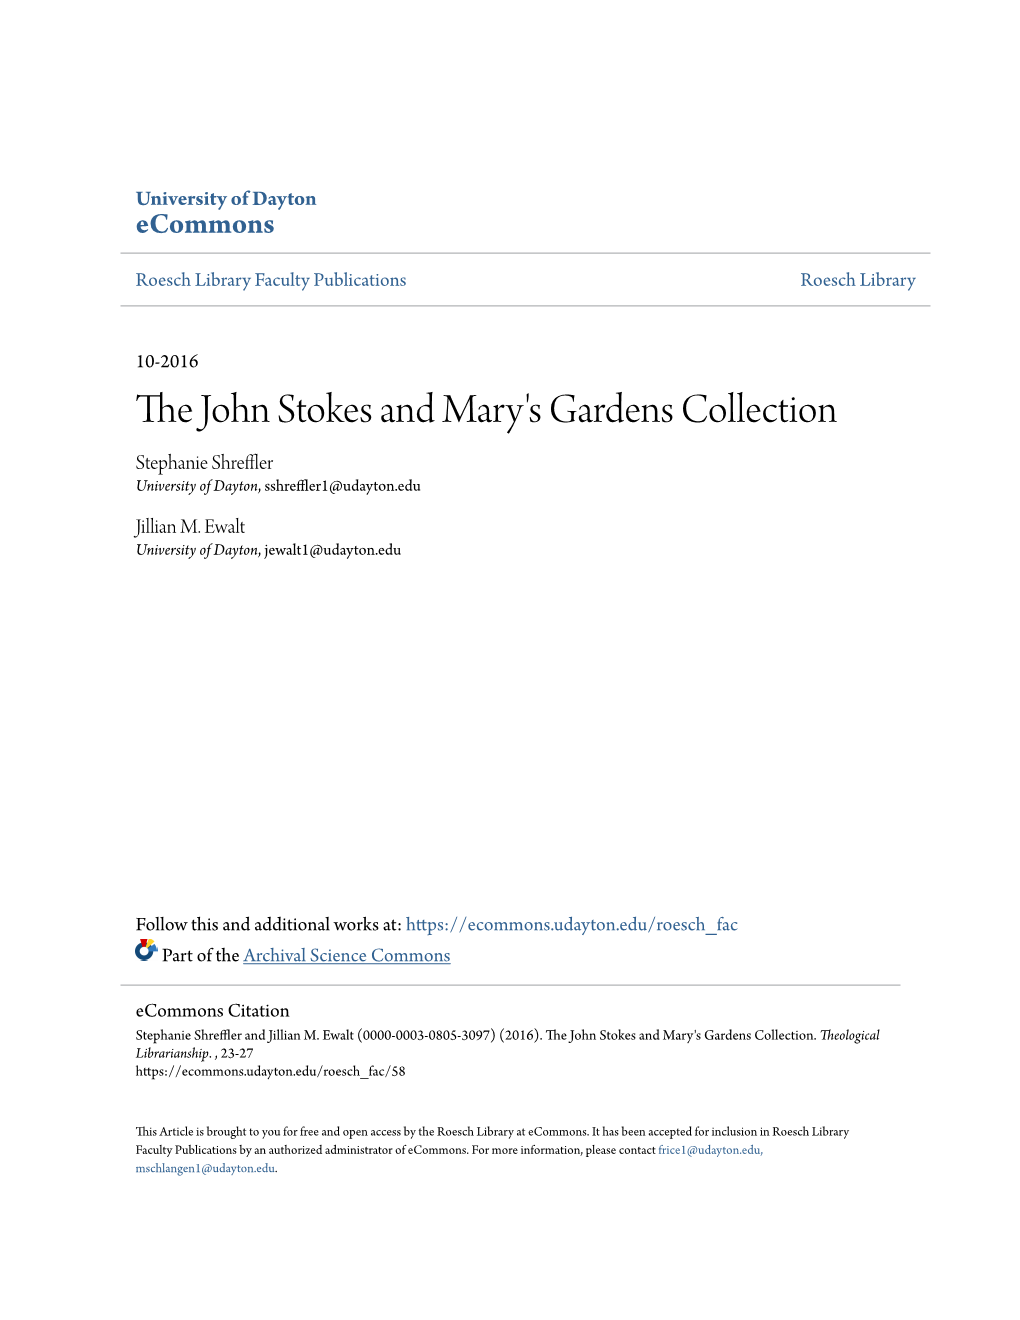 The John Stokes and Mary's Gardens Collection